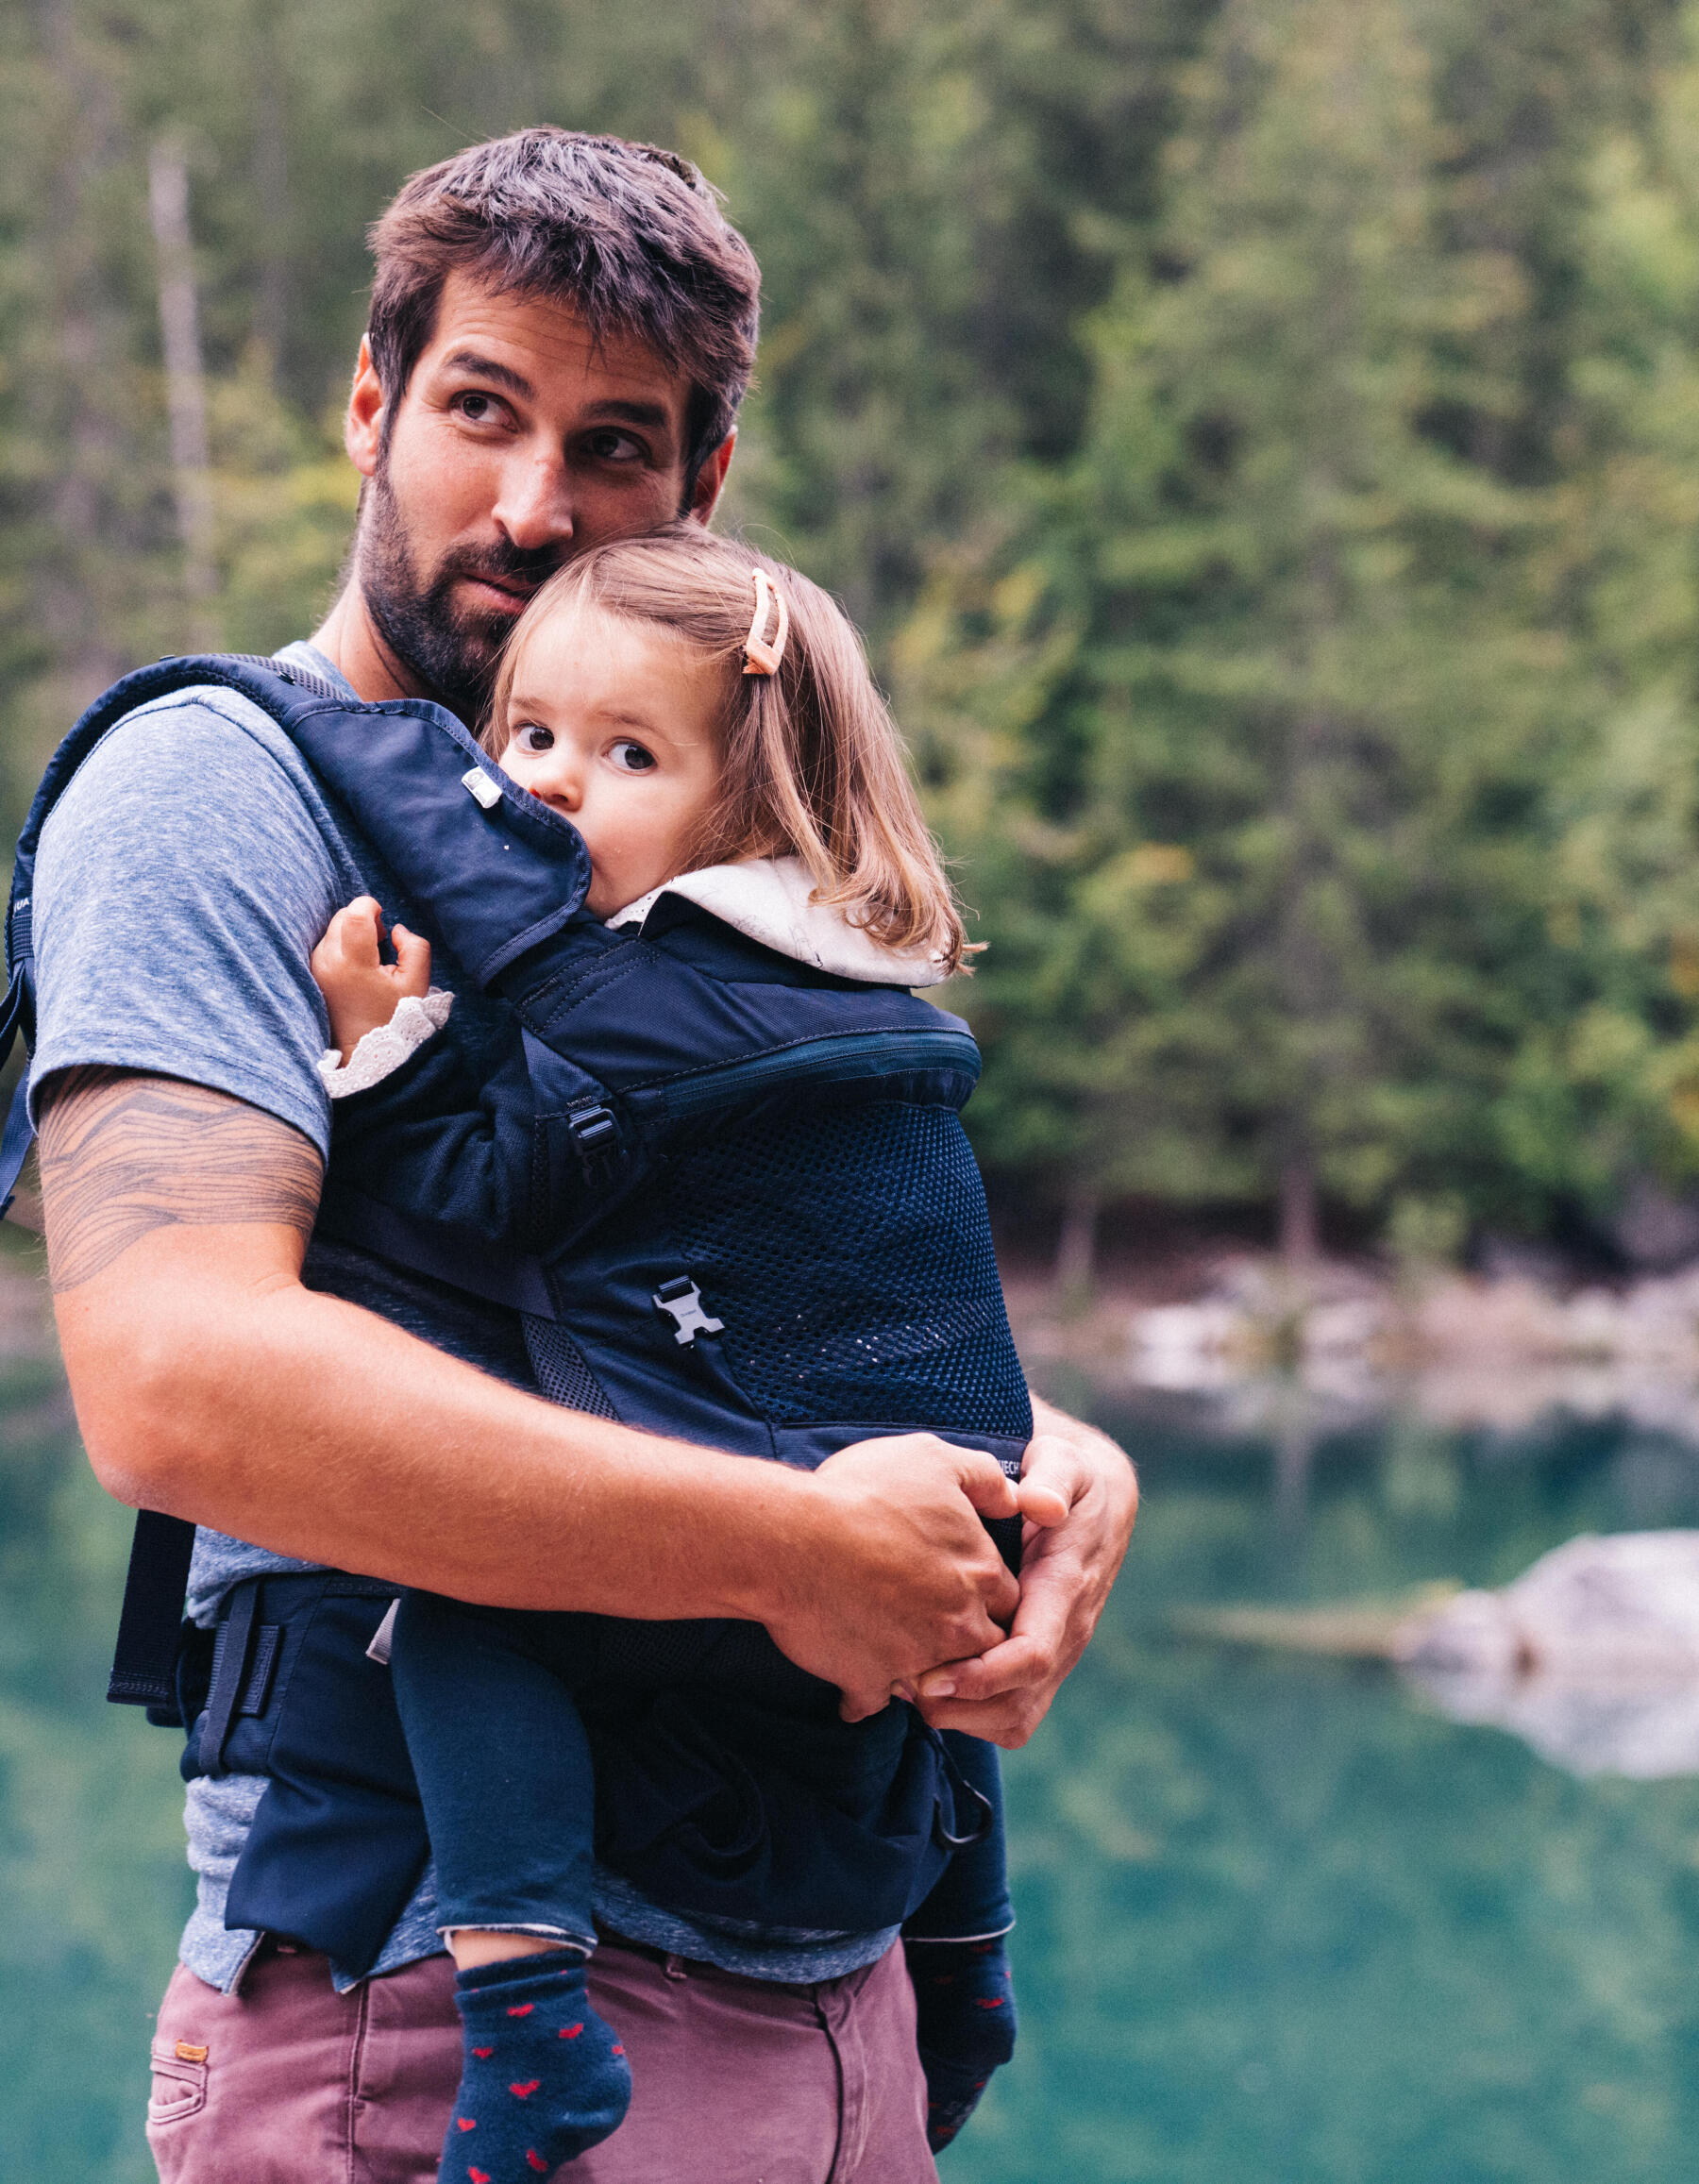 Hiking with baby:our guide. 